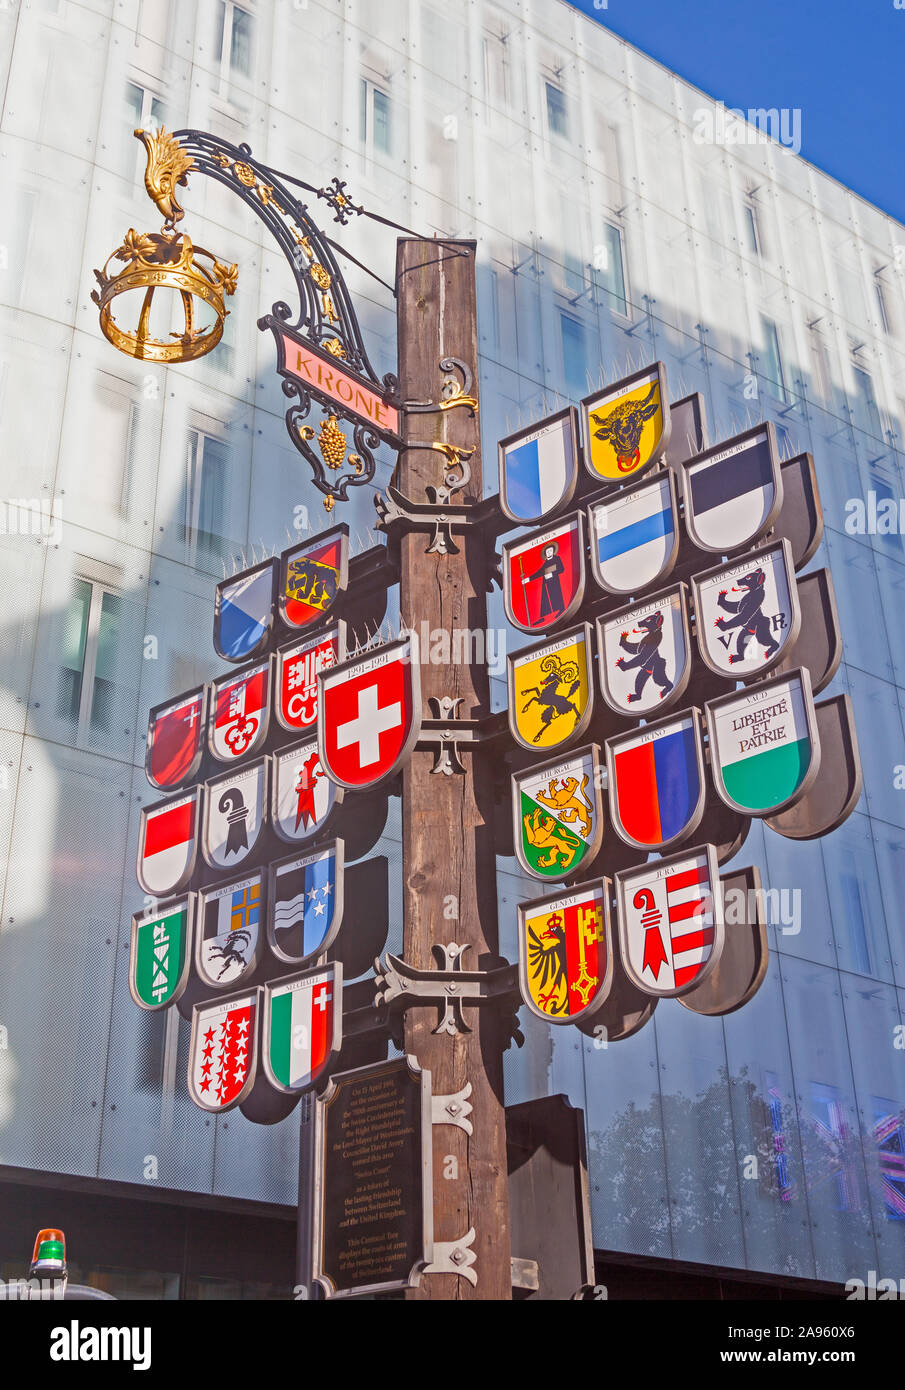 London, Leicester Square. The Cantonal Tree in Swiss Court, depicting the 26 cantons of the Swiss Confederation. Stock Photo